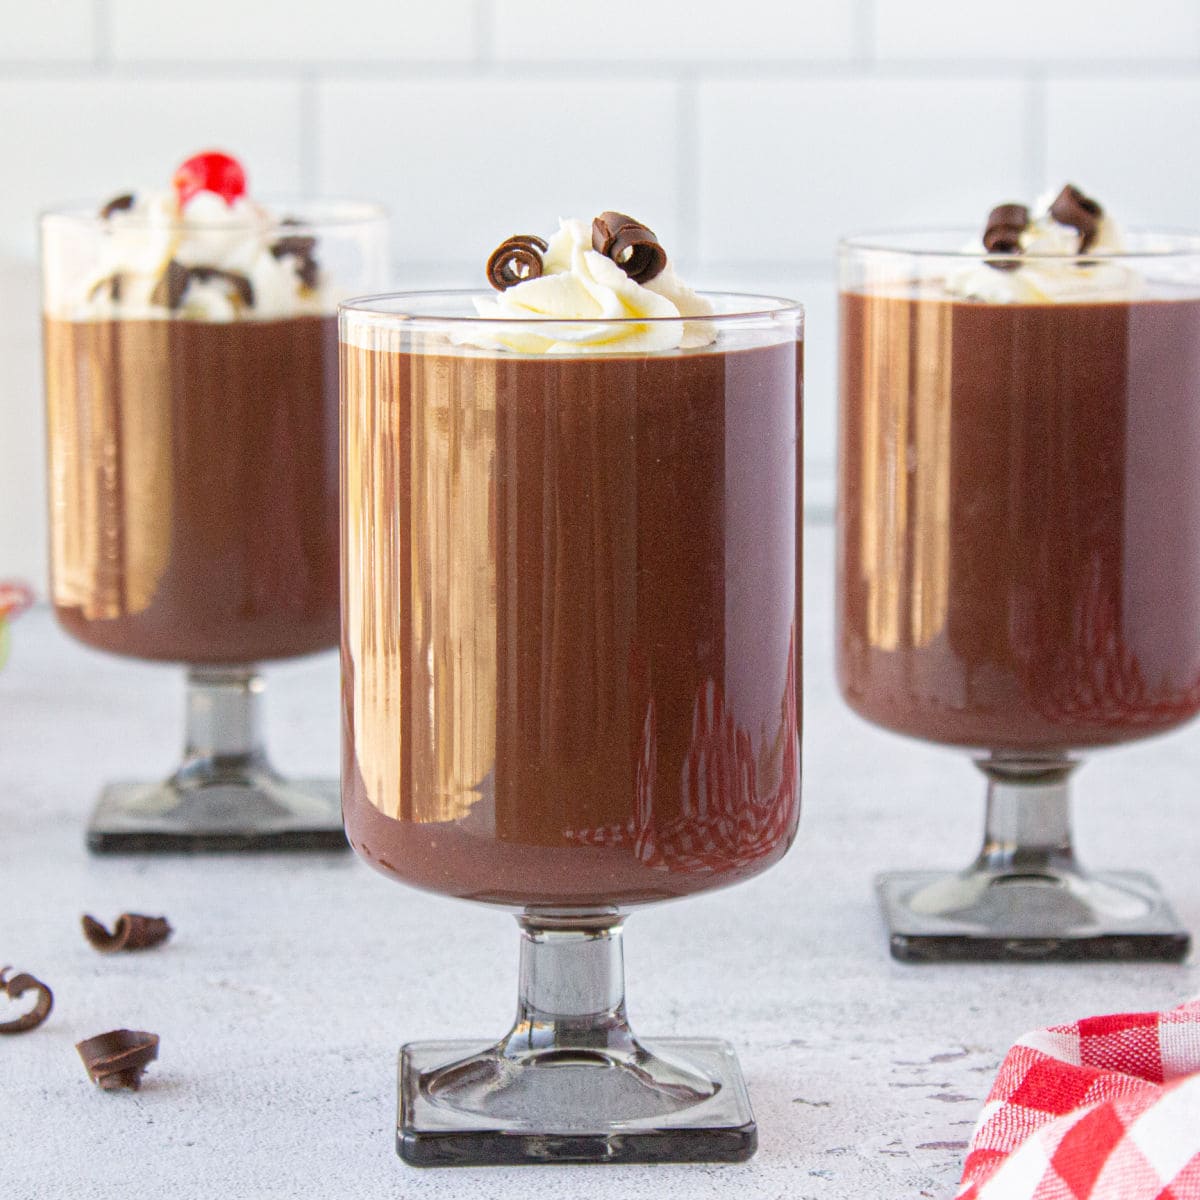 Three glasses filled with chocolate pudding on a white table.